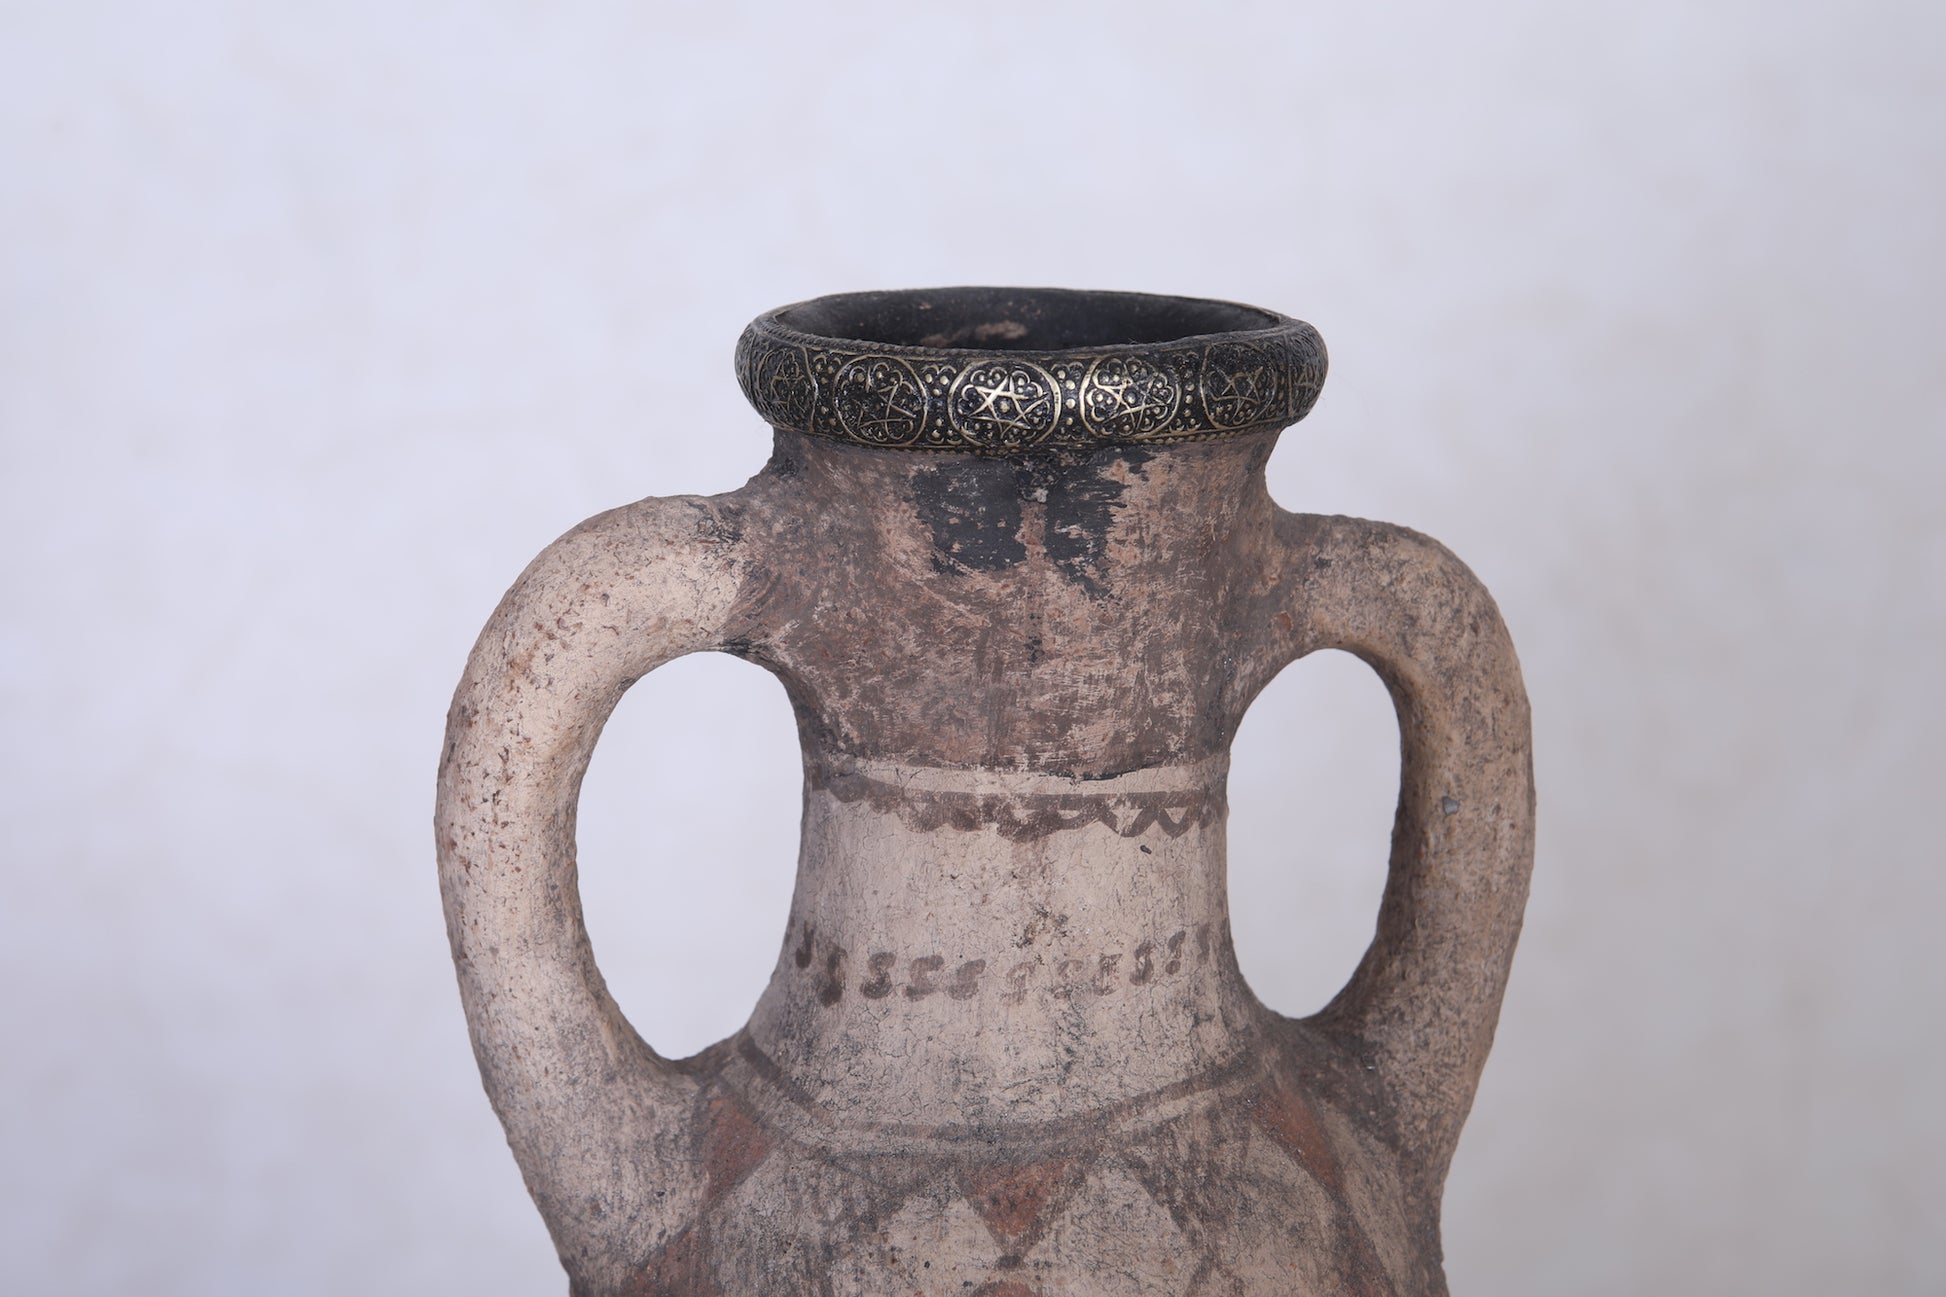 Antique moroccan clay water pot 6.2 INCHES X 10.2 INCHES